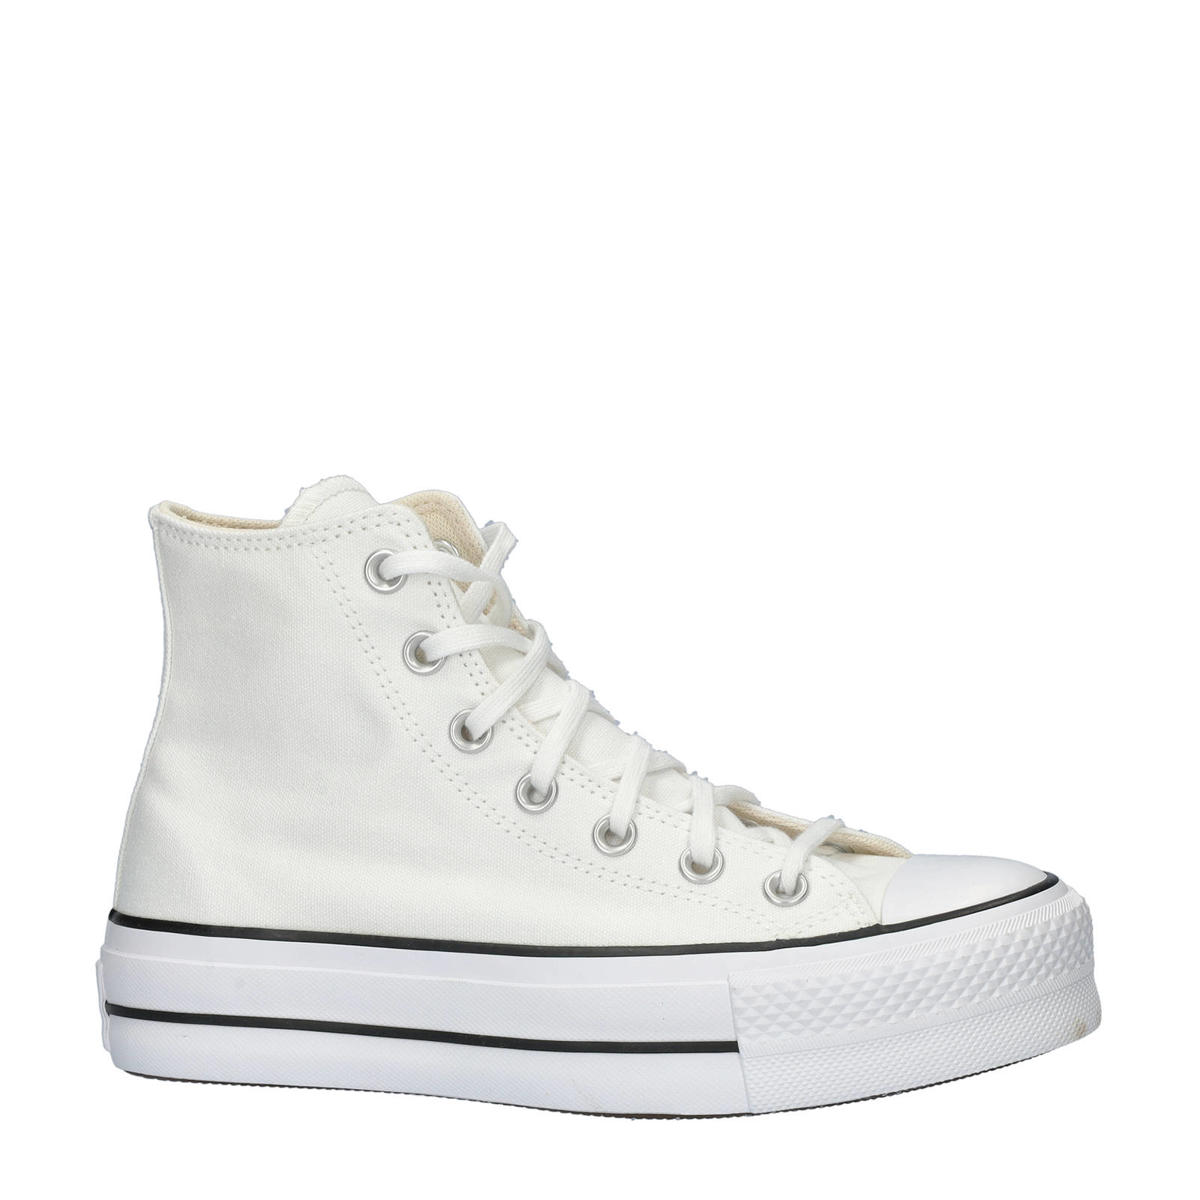 schokkend snap Ounce Converse All Star High Top Platform canvas sneakers wit | wehkamp